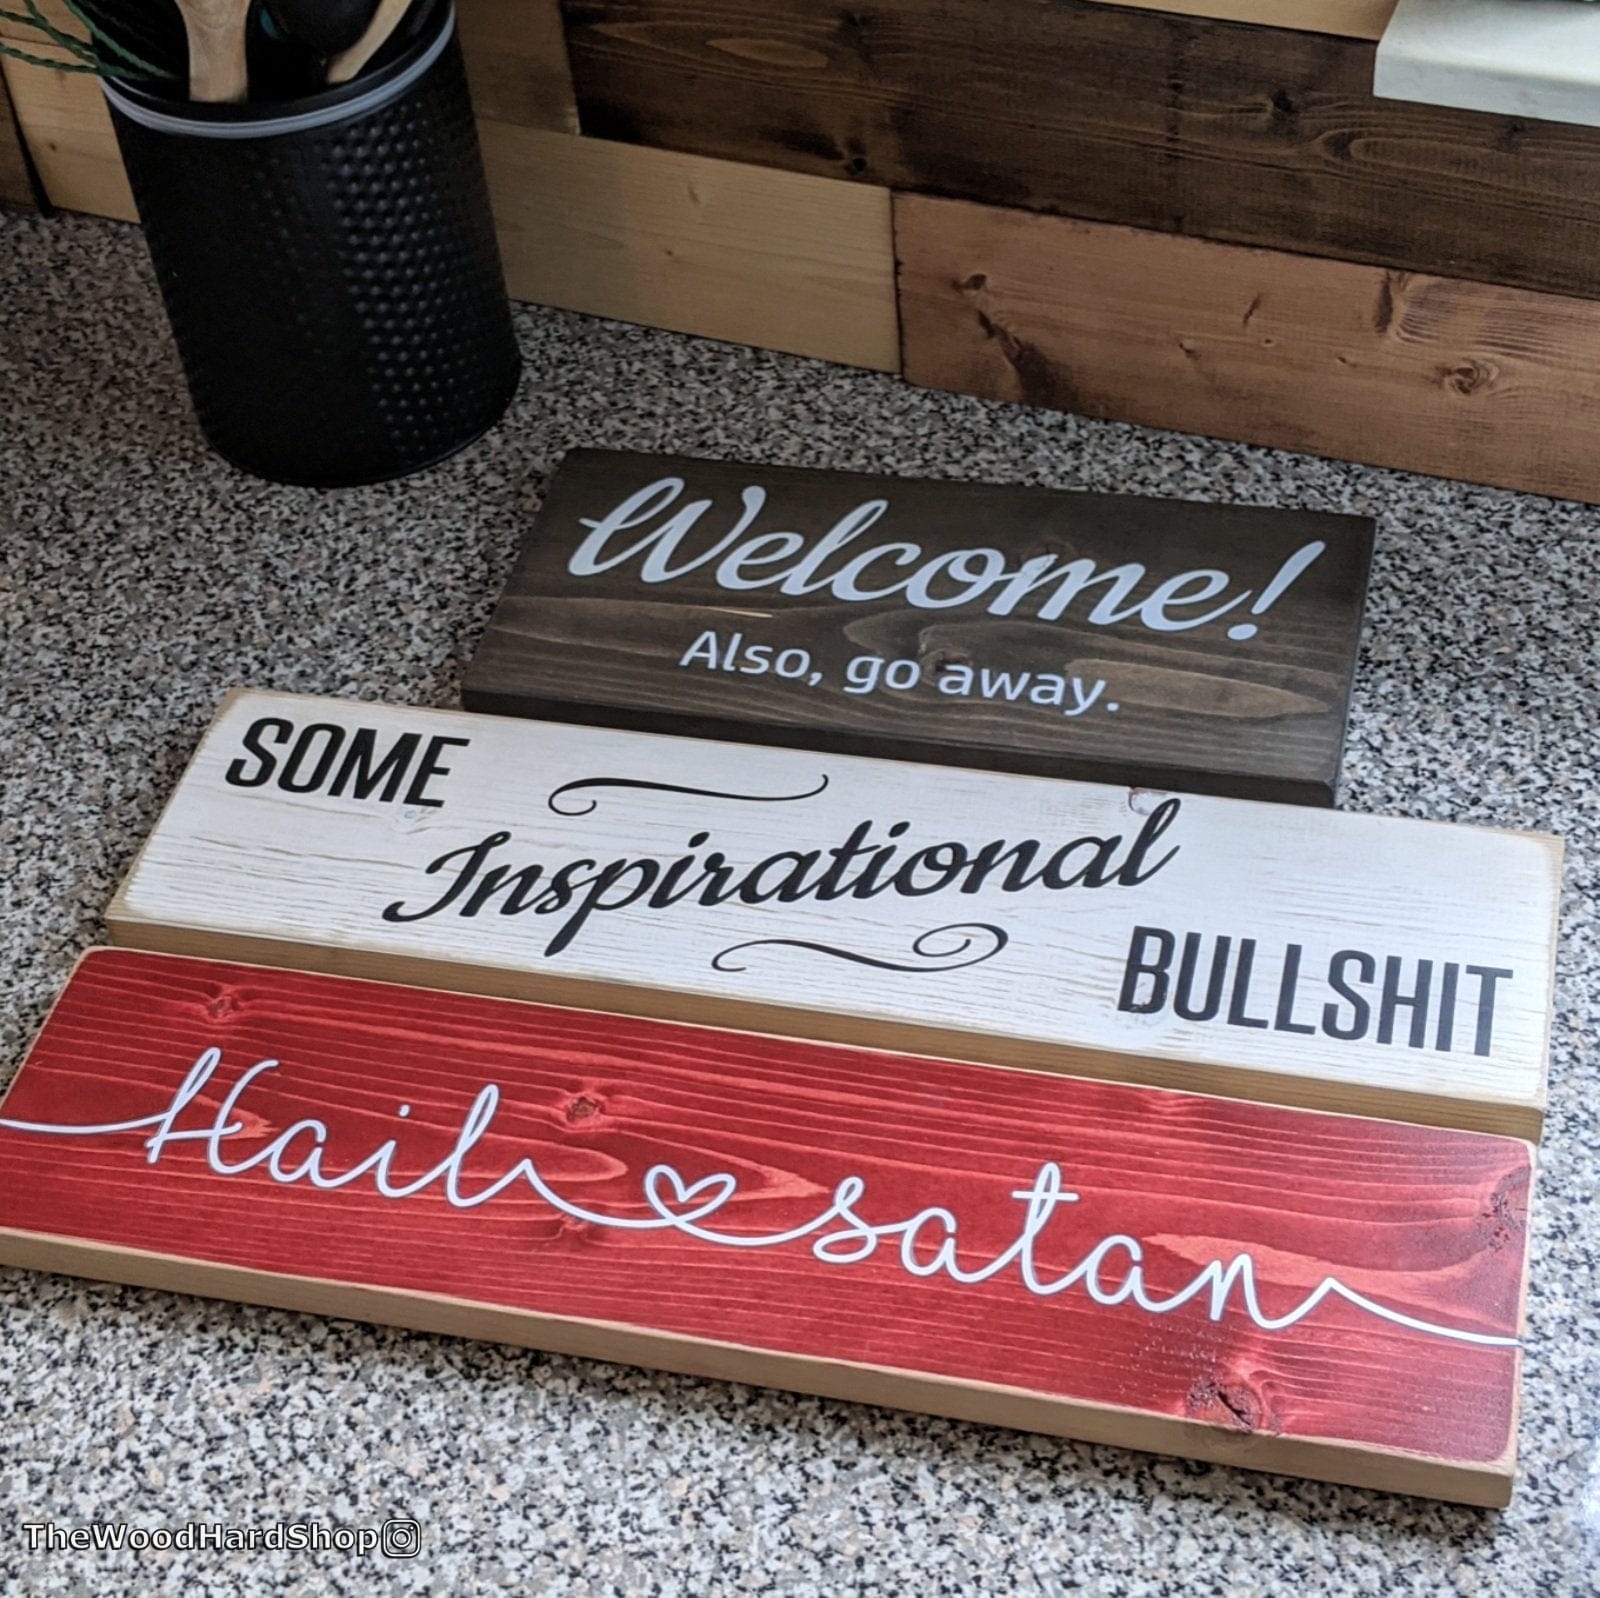 Here’s some dope welcome signs, if you’re bored of all the inspiration bullshit